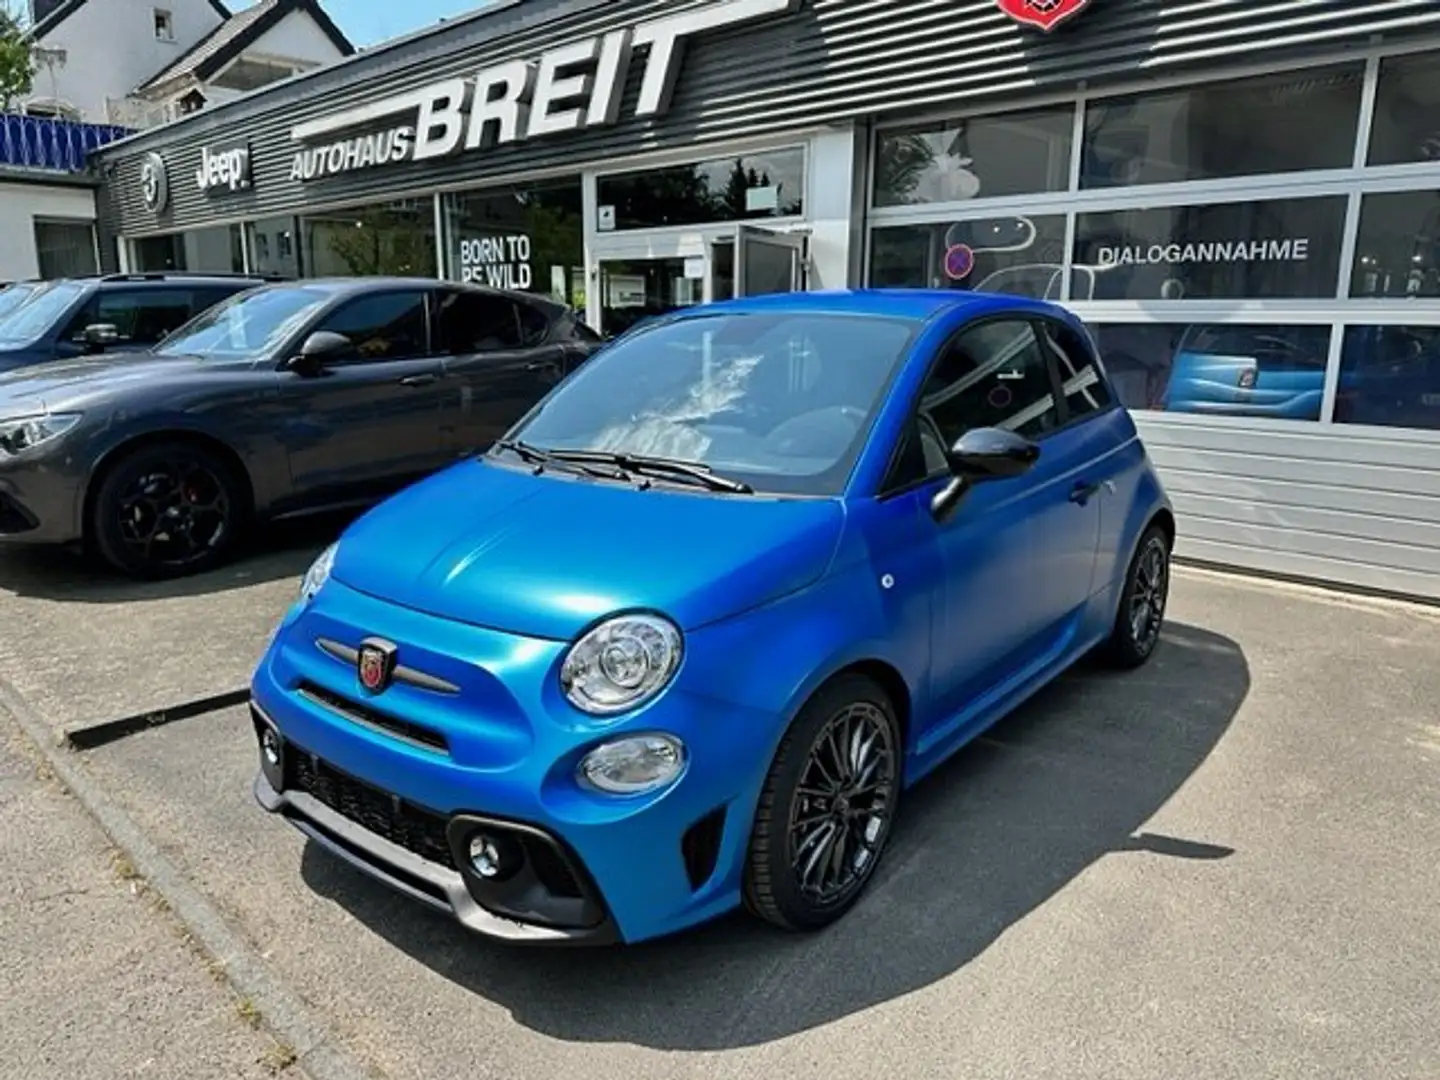 Abarth 695 695 1.4 T-Jet 132 kW (180 PS) Blue - 1